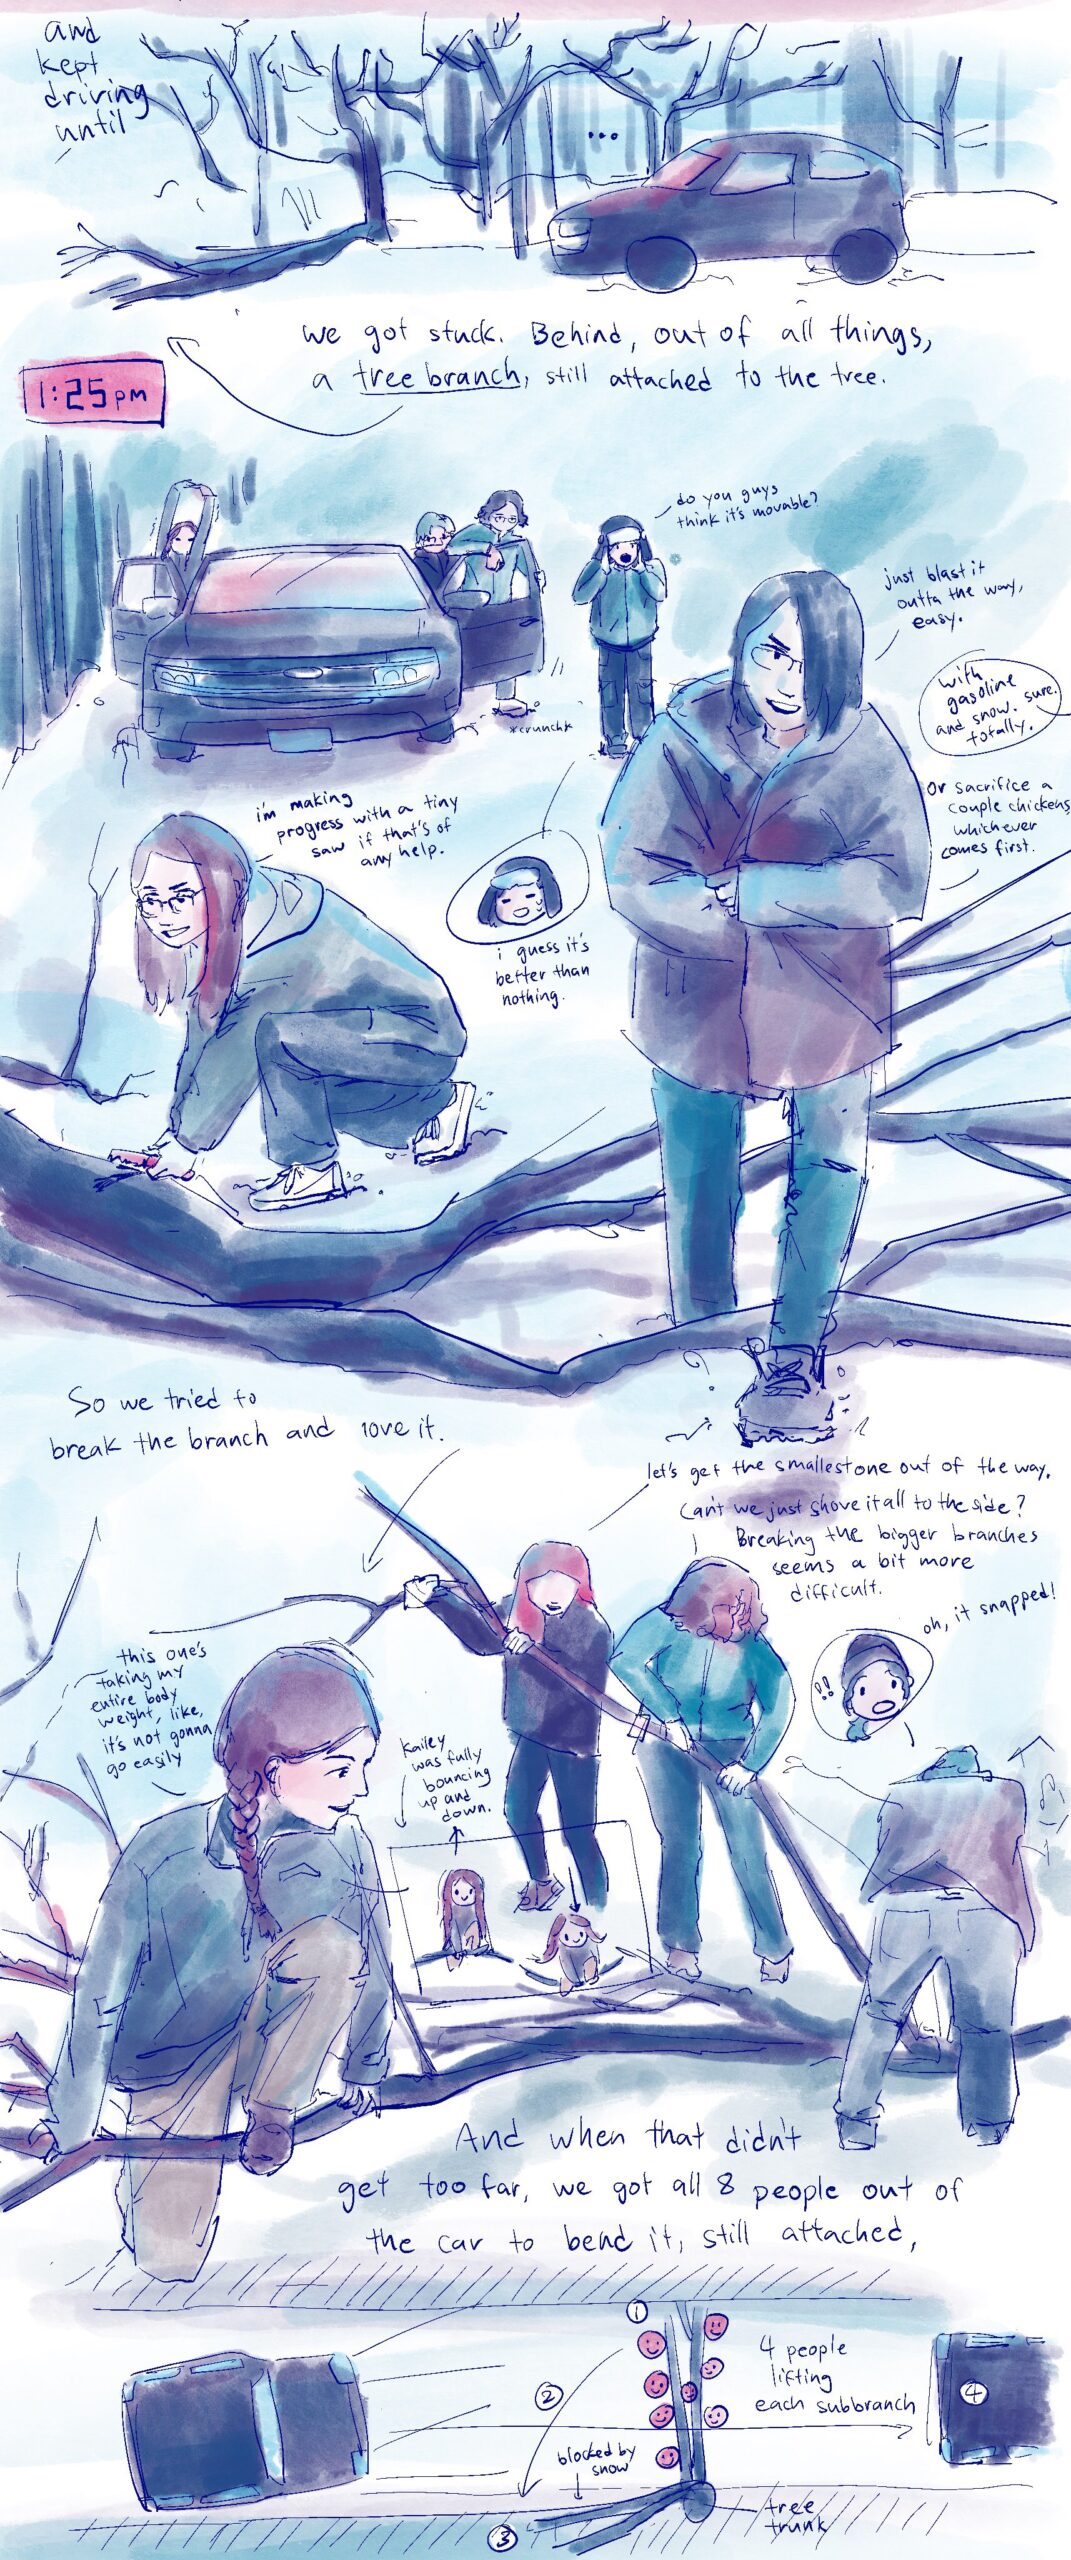 and then drive deeper into the snow covered mountains until we get stuck behind a tree branch. Michelle tries sawing it and Oliver offers to sacrifice a chicken, and the rest of the crew decide to try and rotate the branch off to the side, with it still attached to the tree.